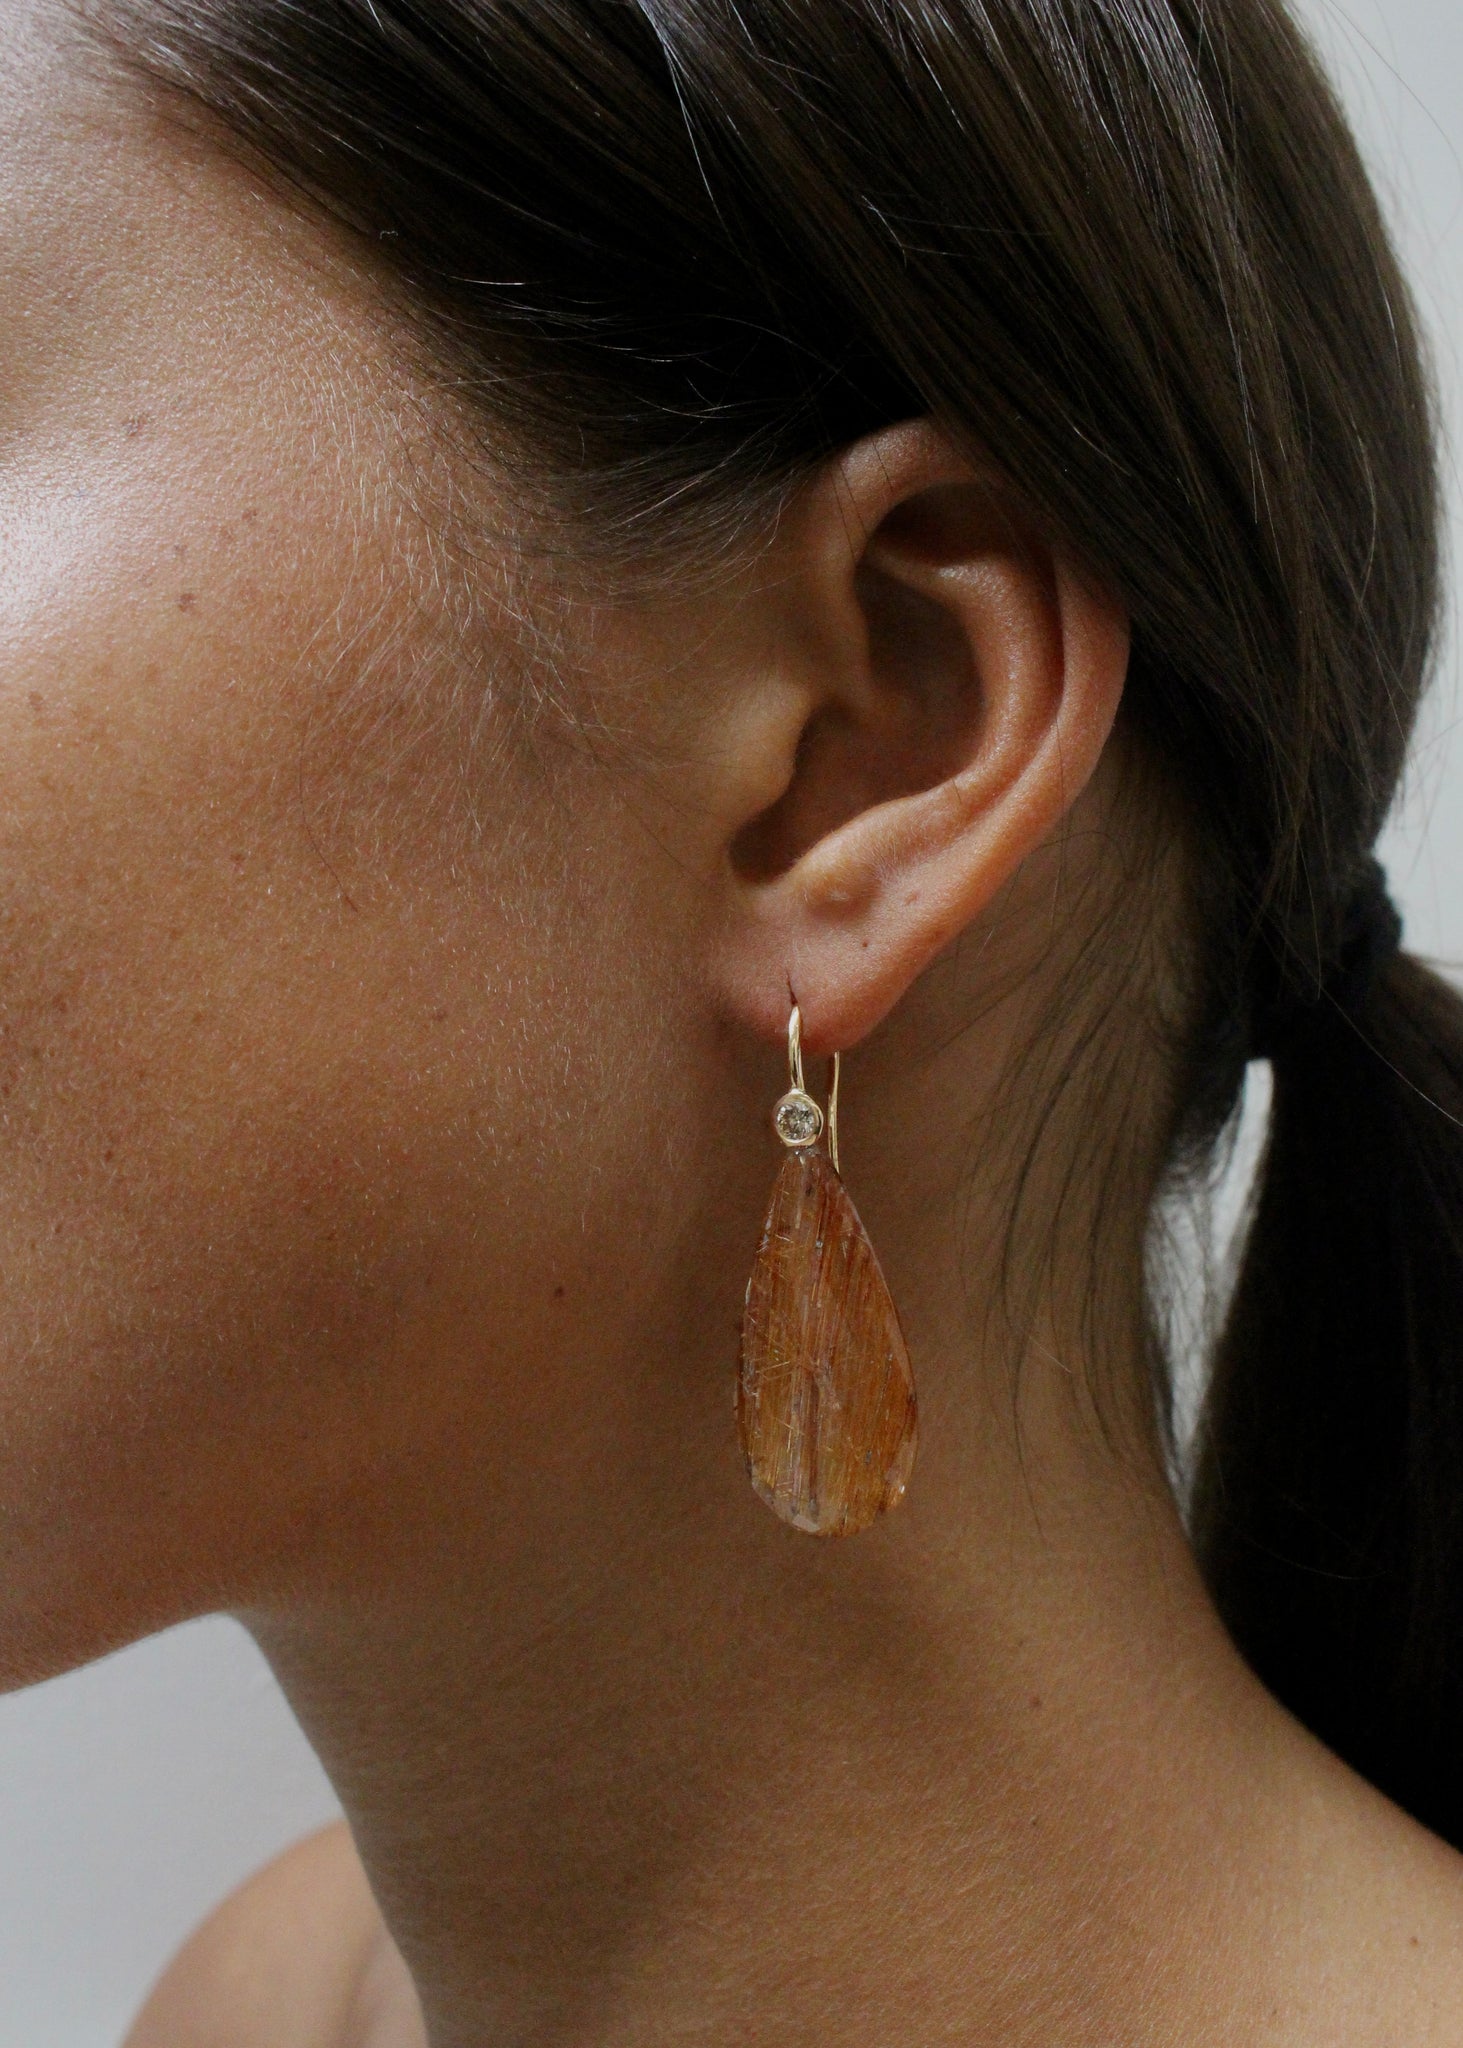 18 krt red gold earrings set with 2 brilliant diamonds with 2 pear shaped Rutile Quartz